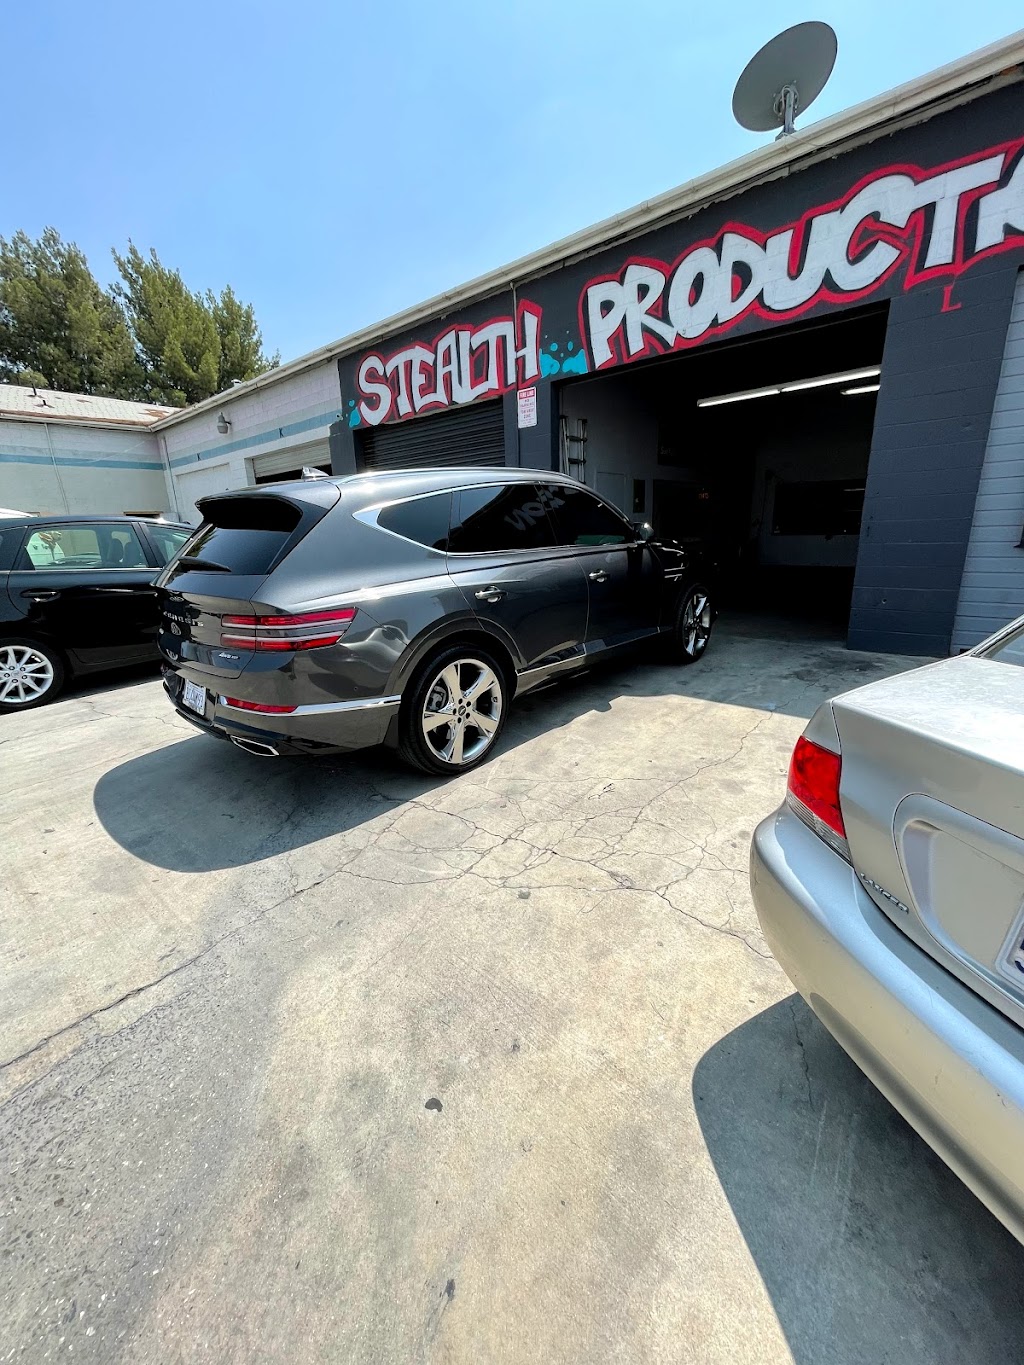 Stealth Productions Window Tint Beaumont | 4097 W Ramsey St Suite L, Banning, CA 92220 | Phone: (909) 674-4295